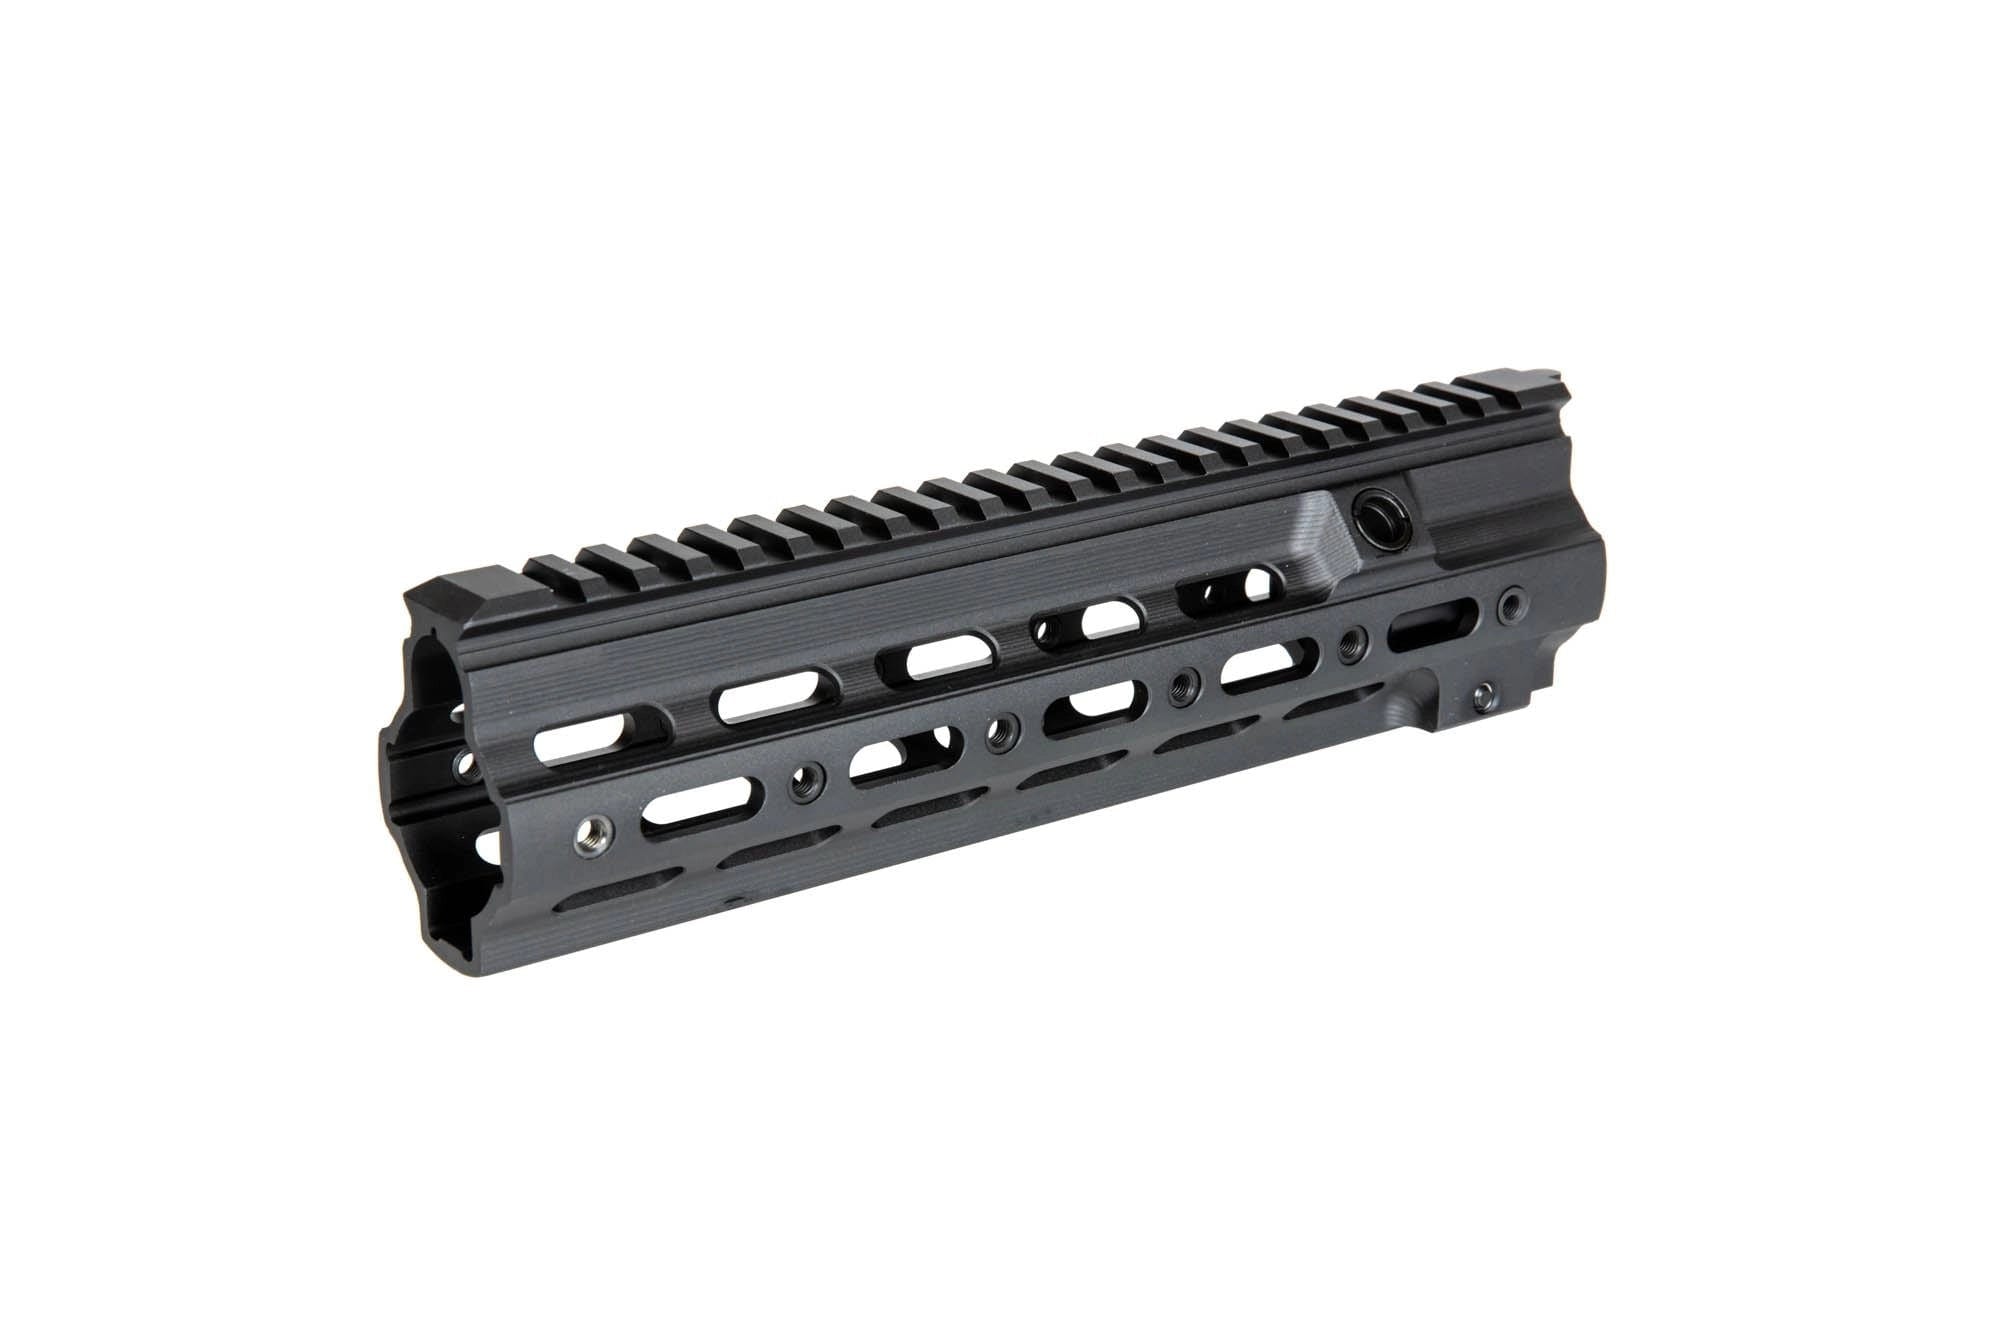 SMR-type RIS hand guard for HK416 airsoft rifles - black